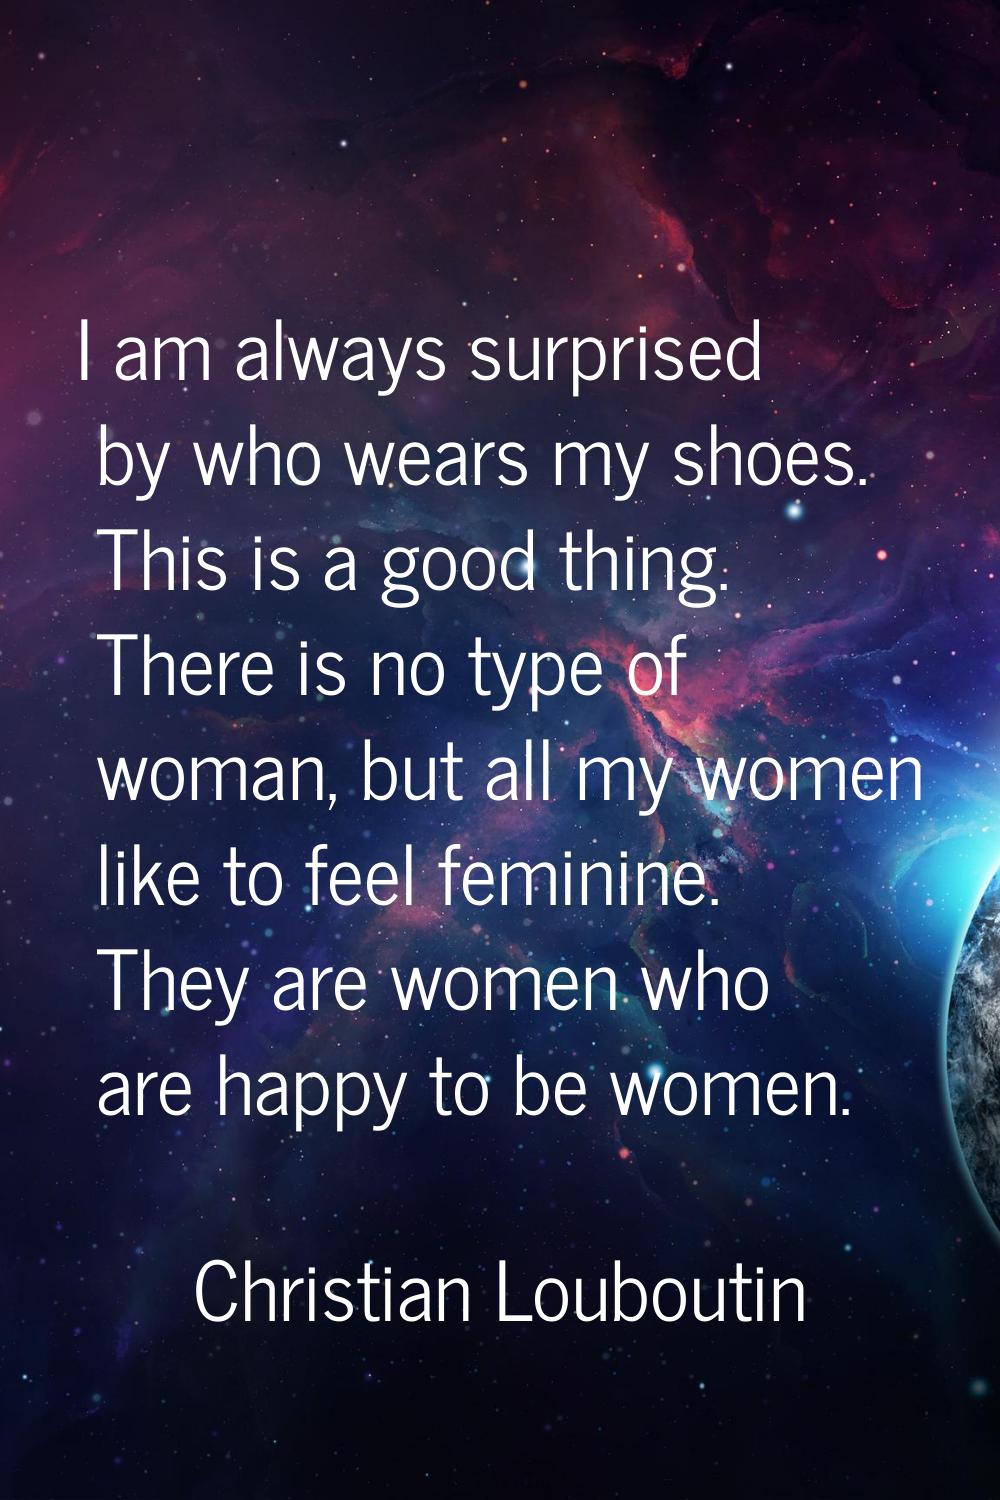 I am always surprised by who wears my shoes. This is a good thing. There is no type of woman, but a